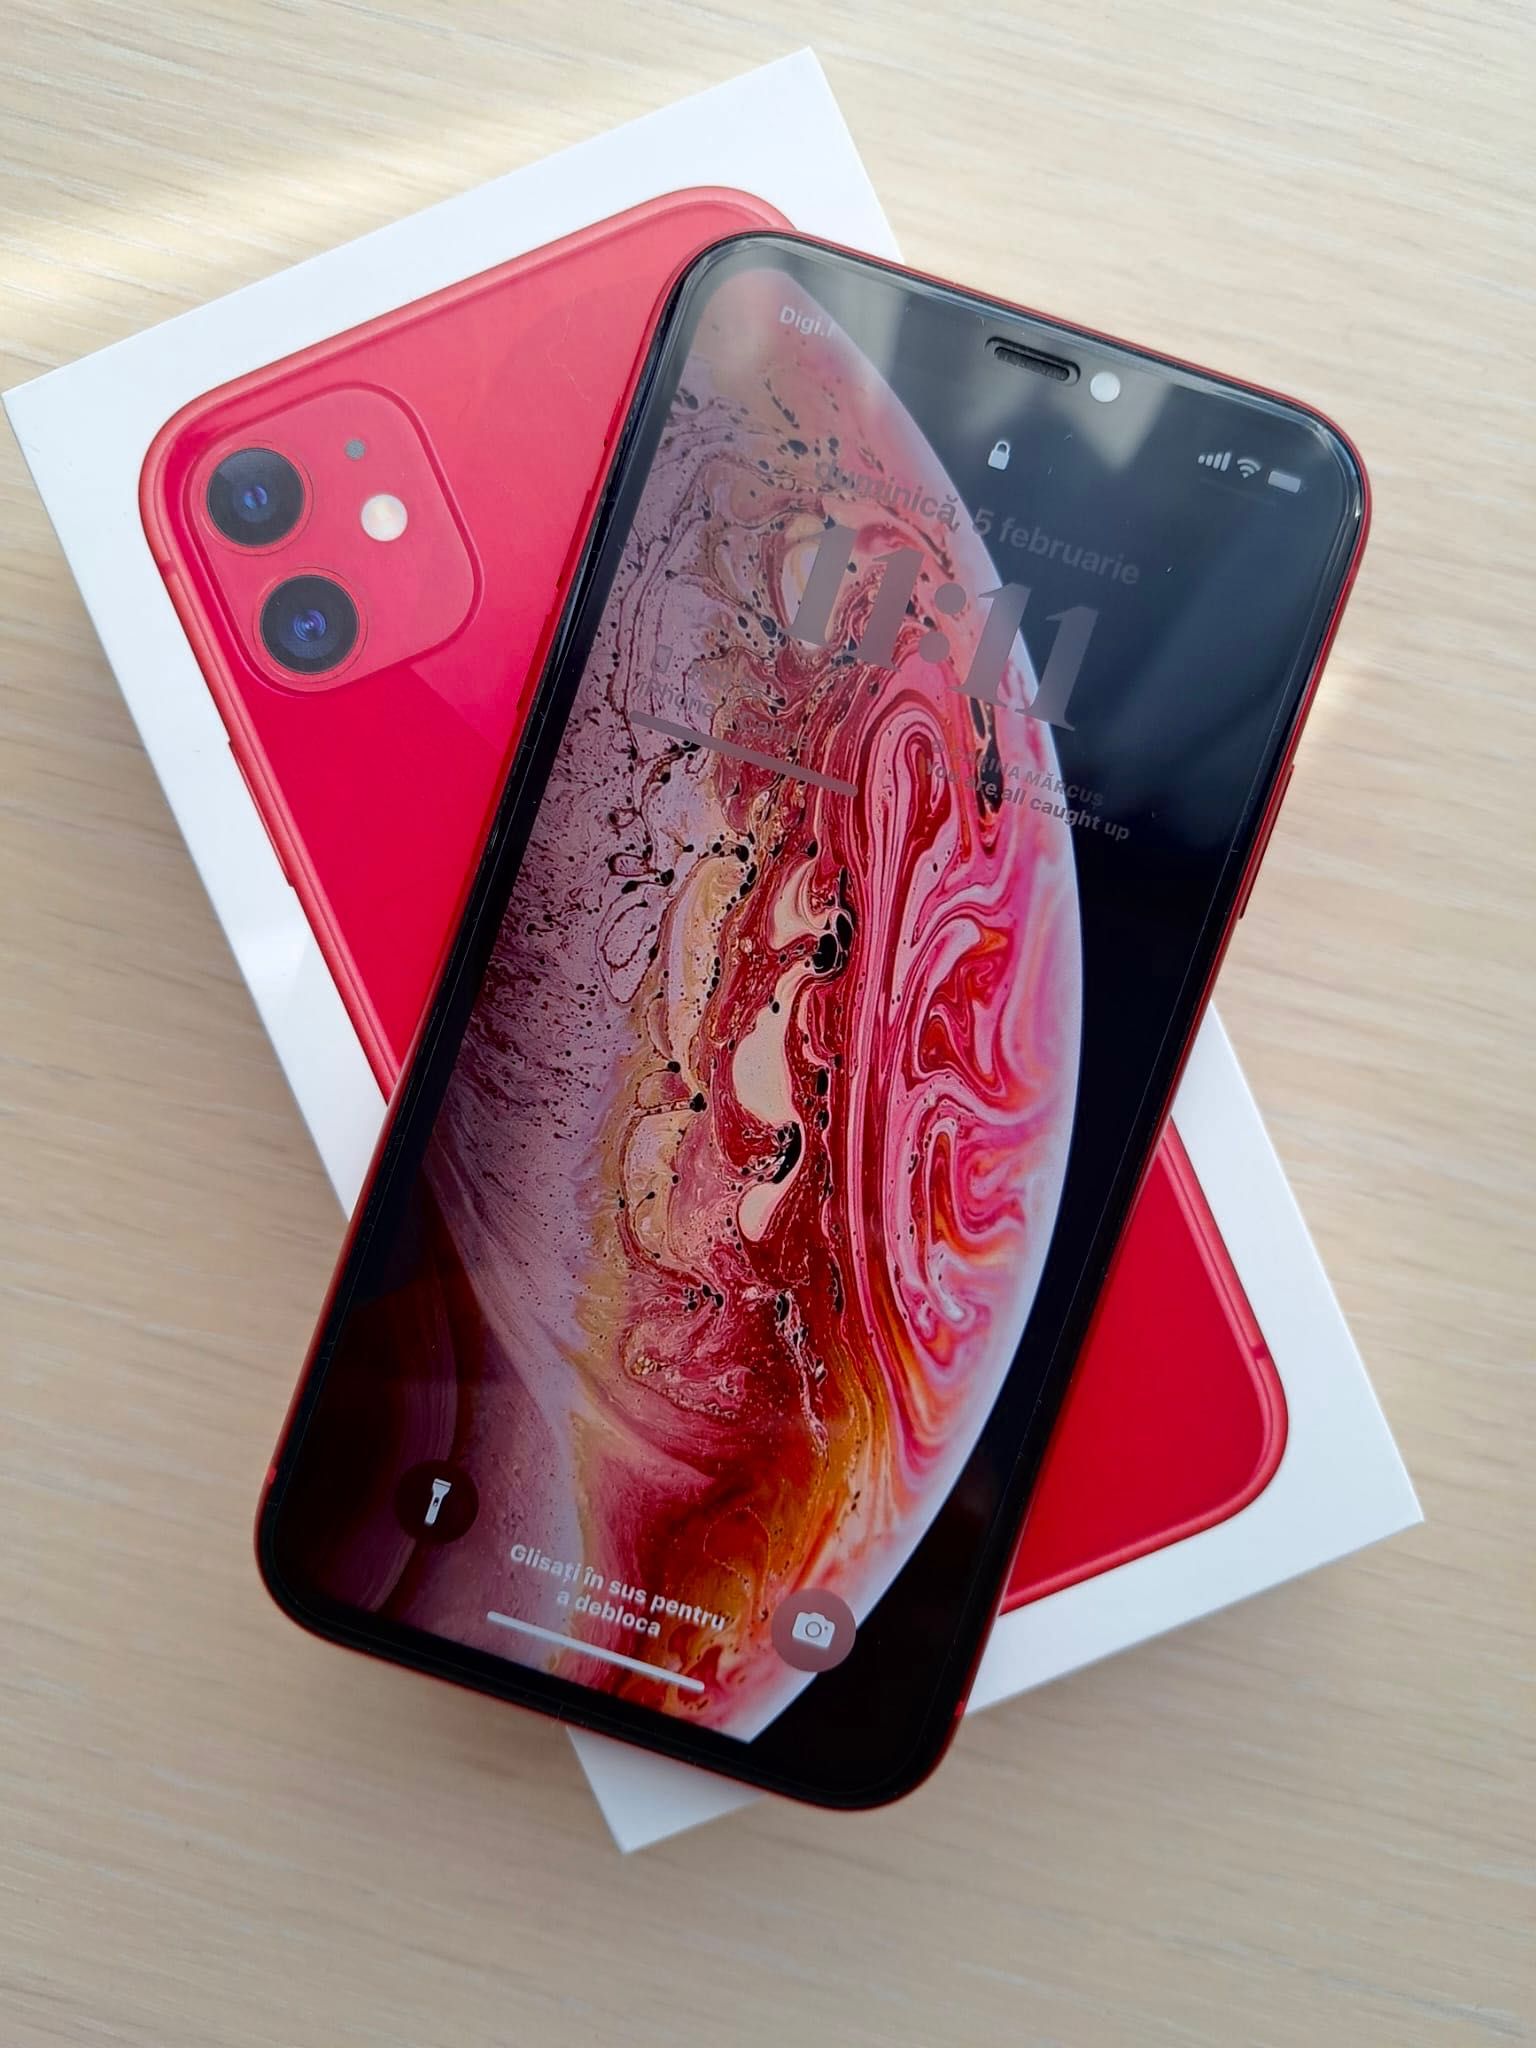 Iphone 11 red(product) 128GB